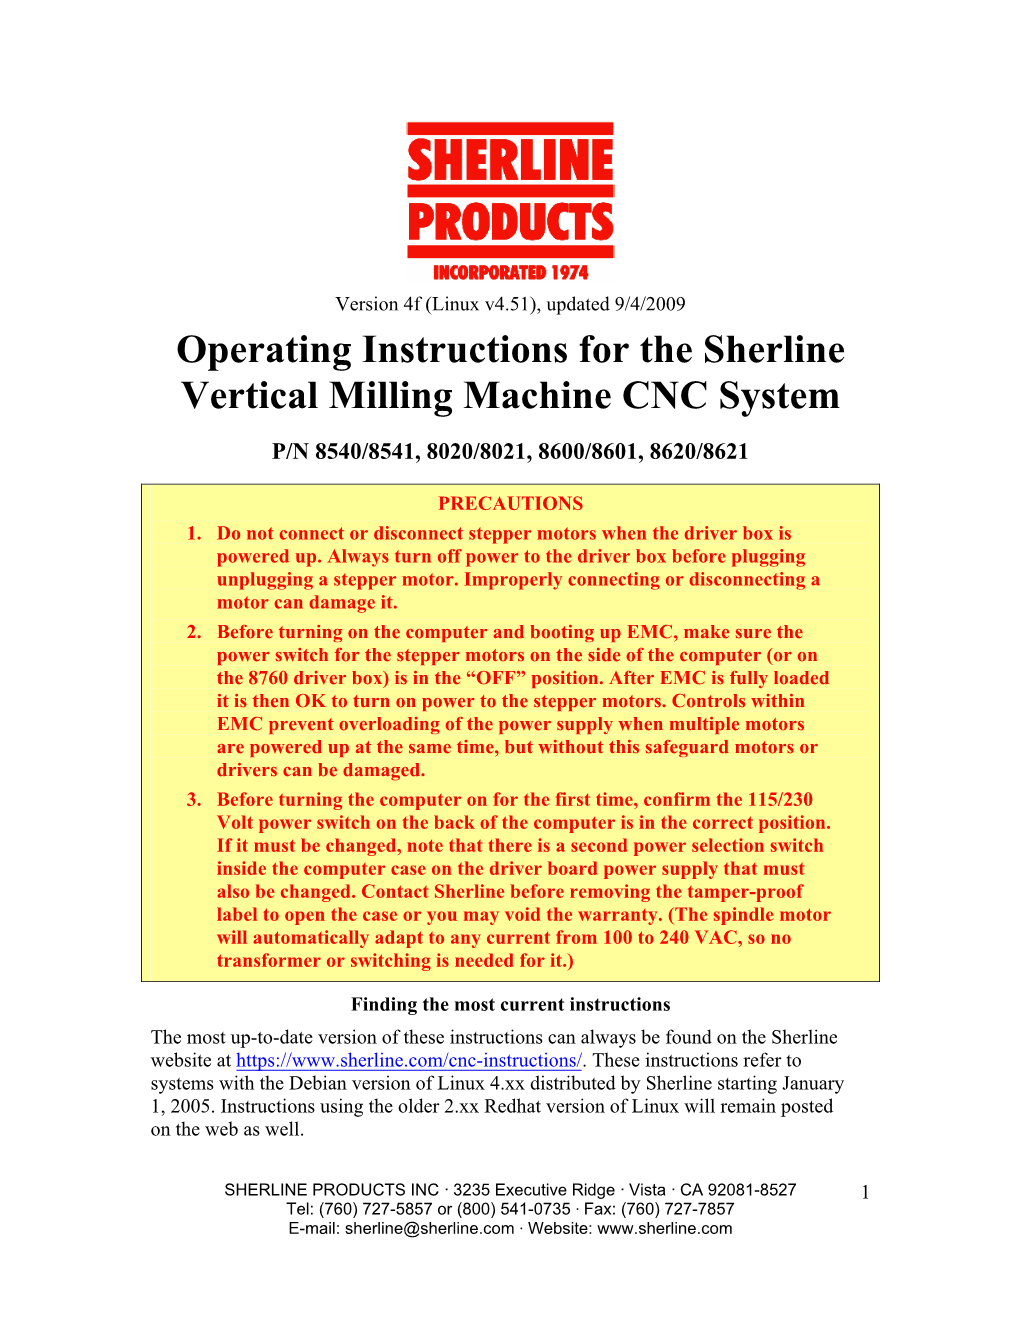 Operating Instructions for the Sherline Vertical Milling Machine CNC System